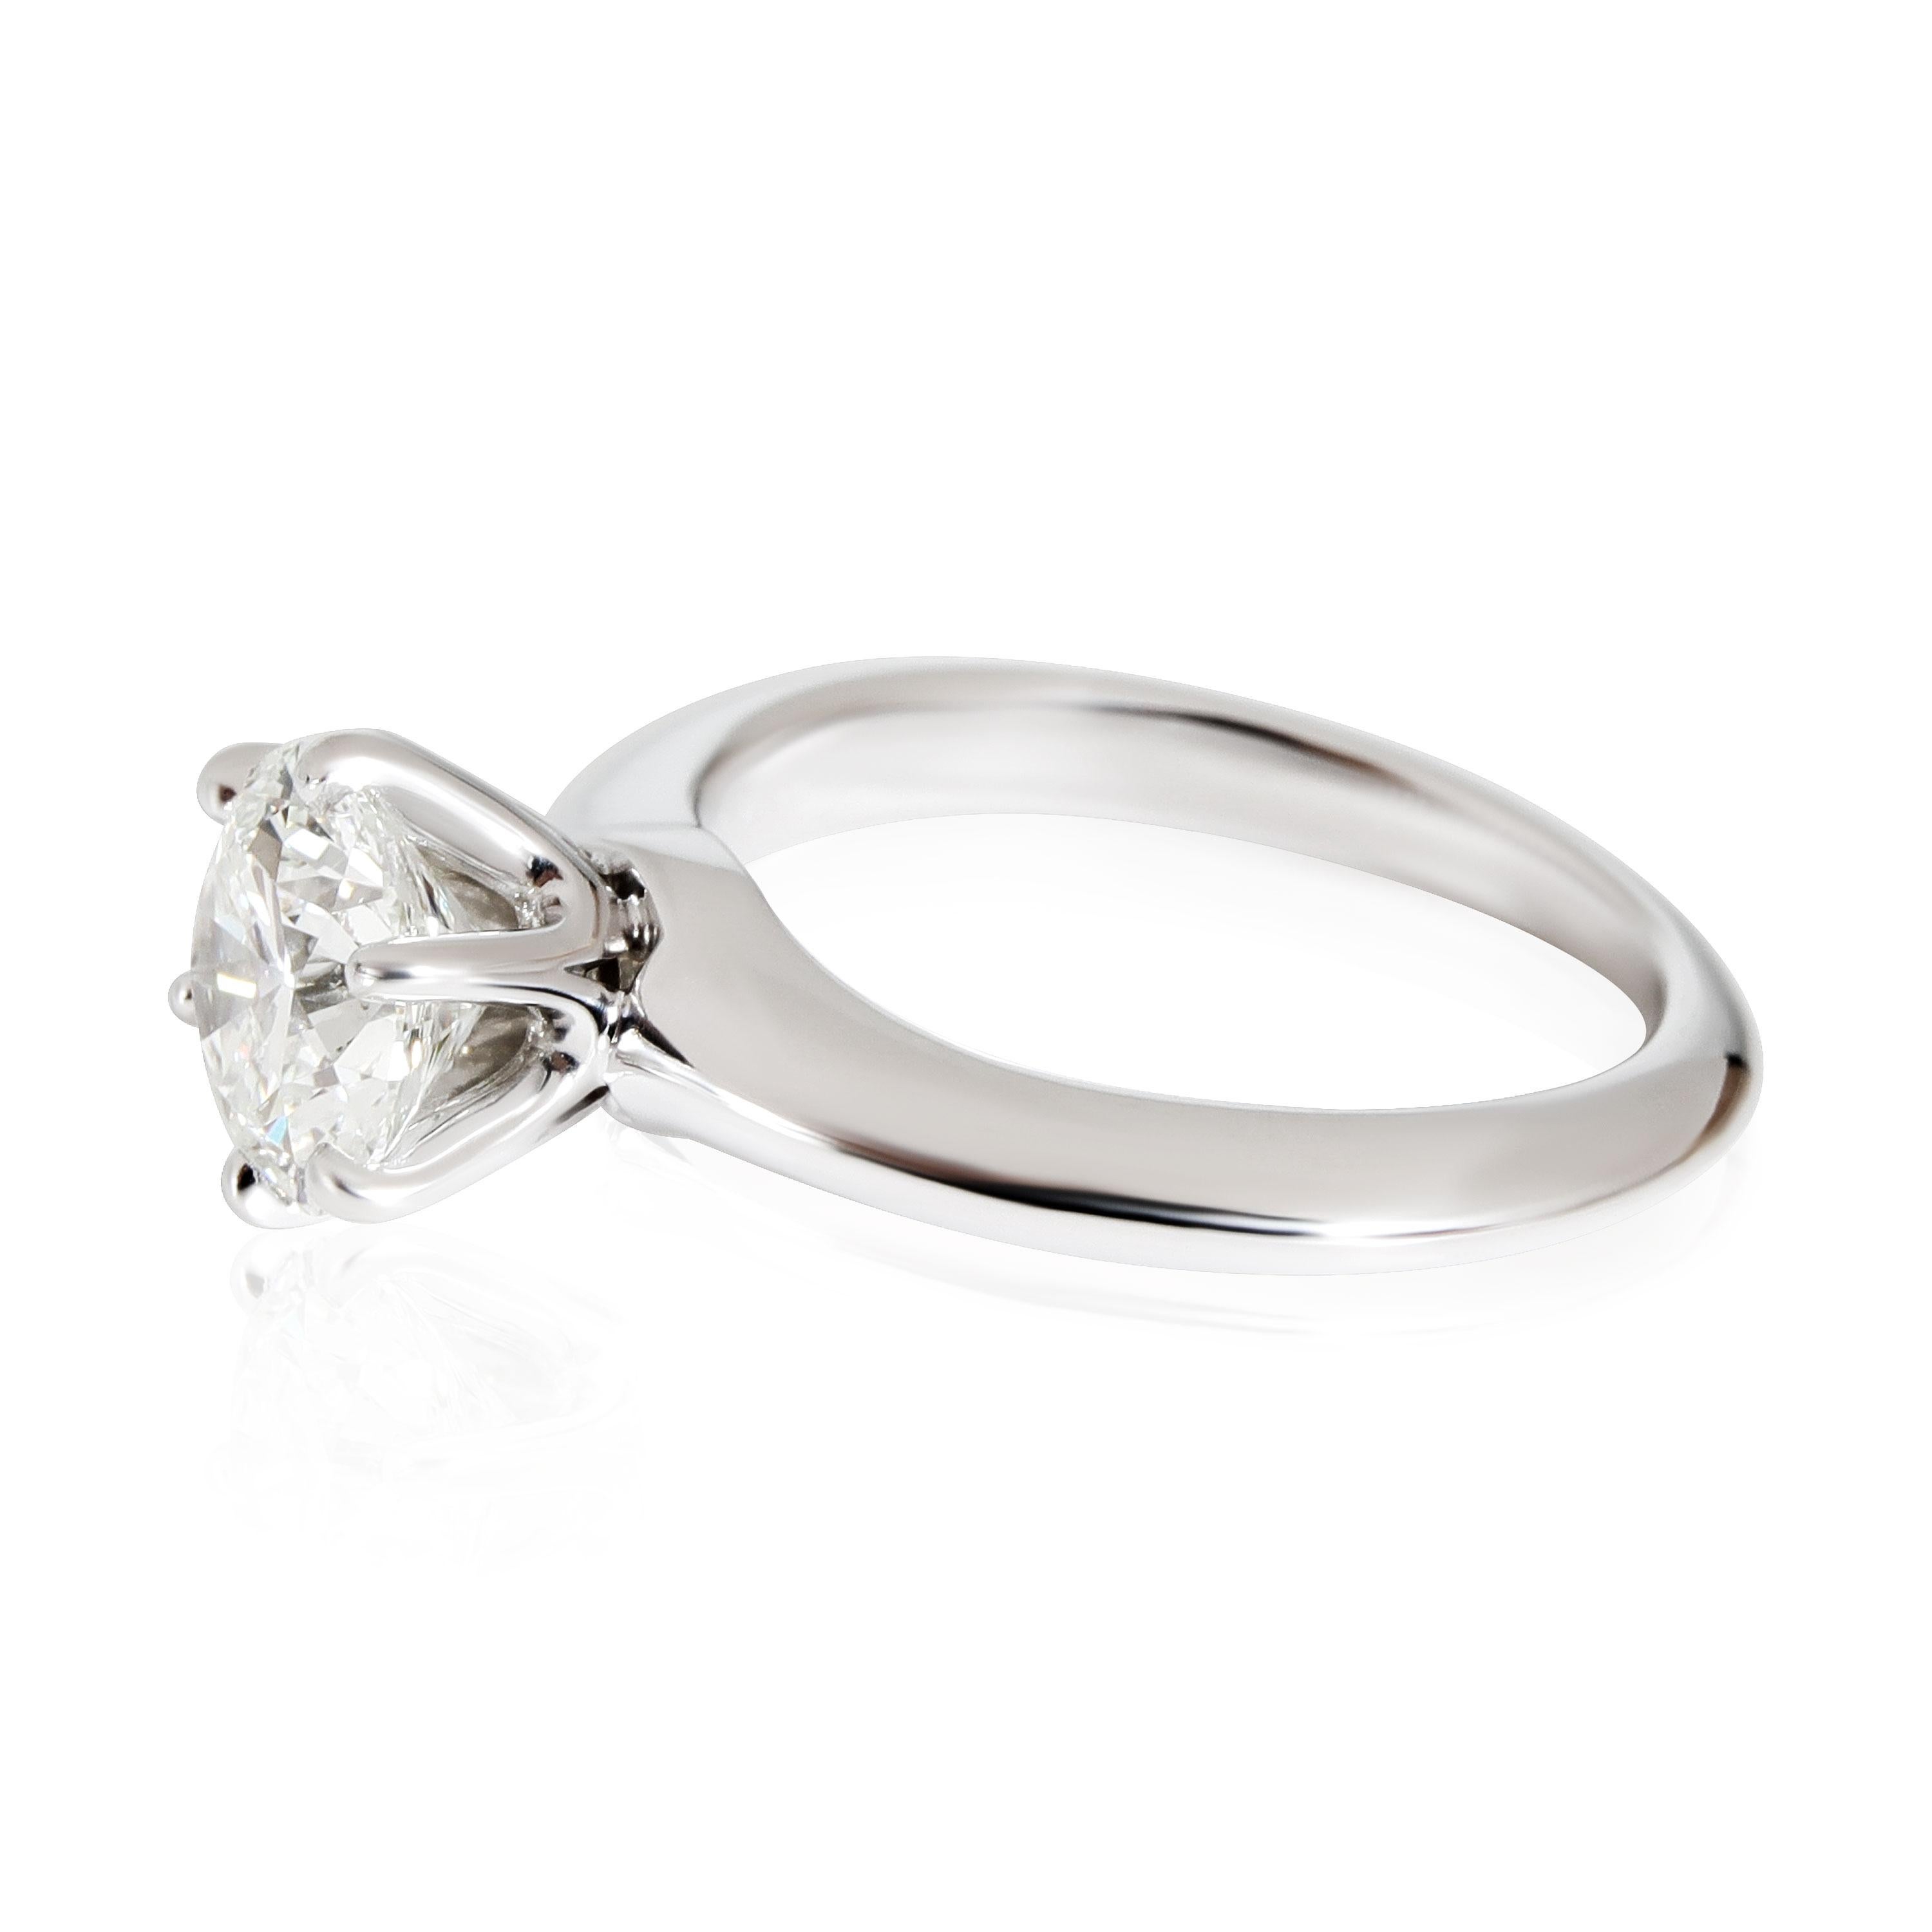 Tiffany & Co. Diamond Engagement Ring in Platinum G SI1 1.16 CTW In Excellent Condition For Sale In New York, NY